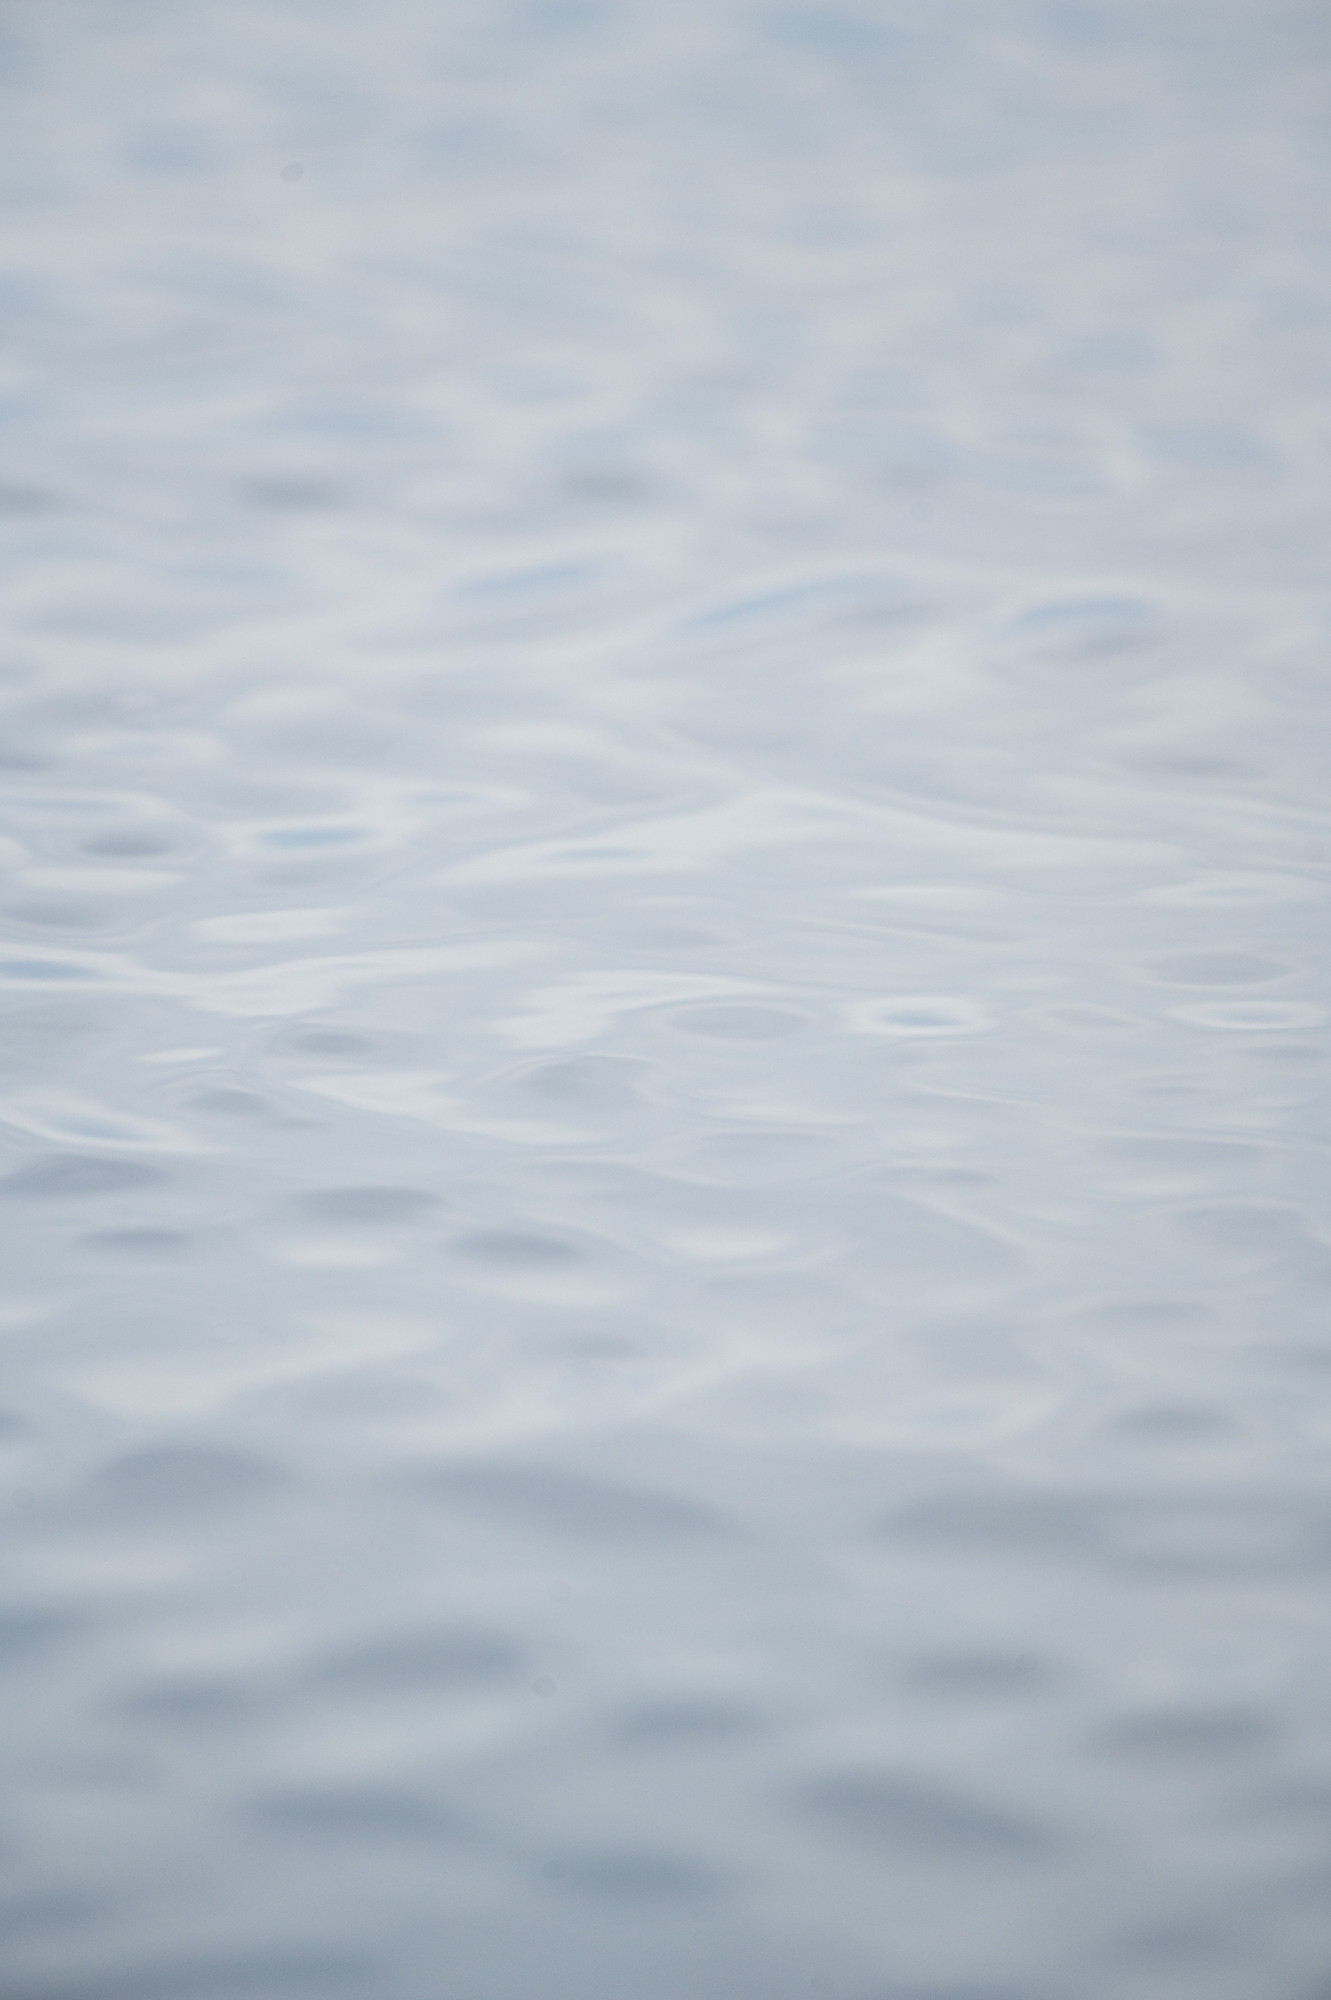 Soft, rounder water ripples under a grey sky